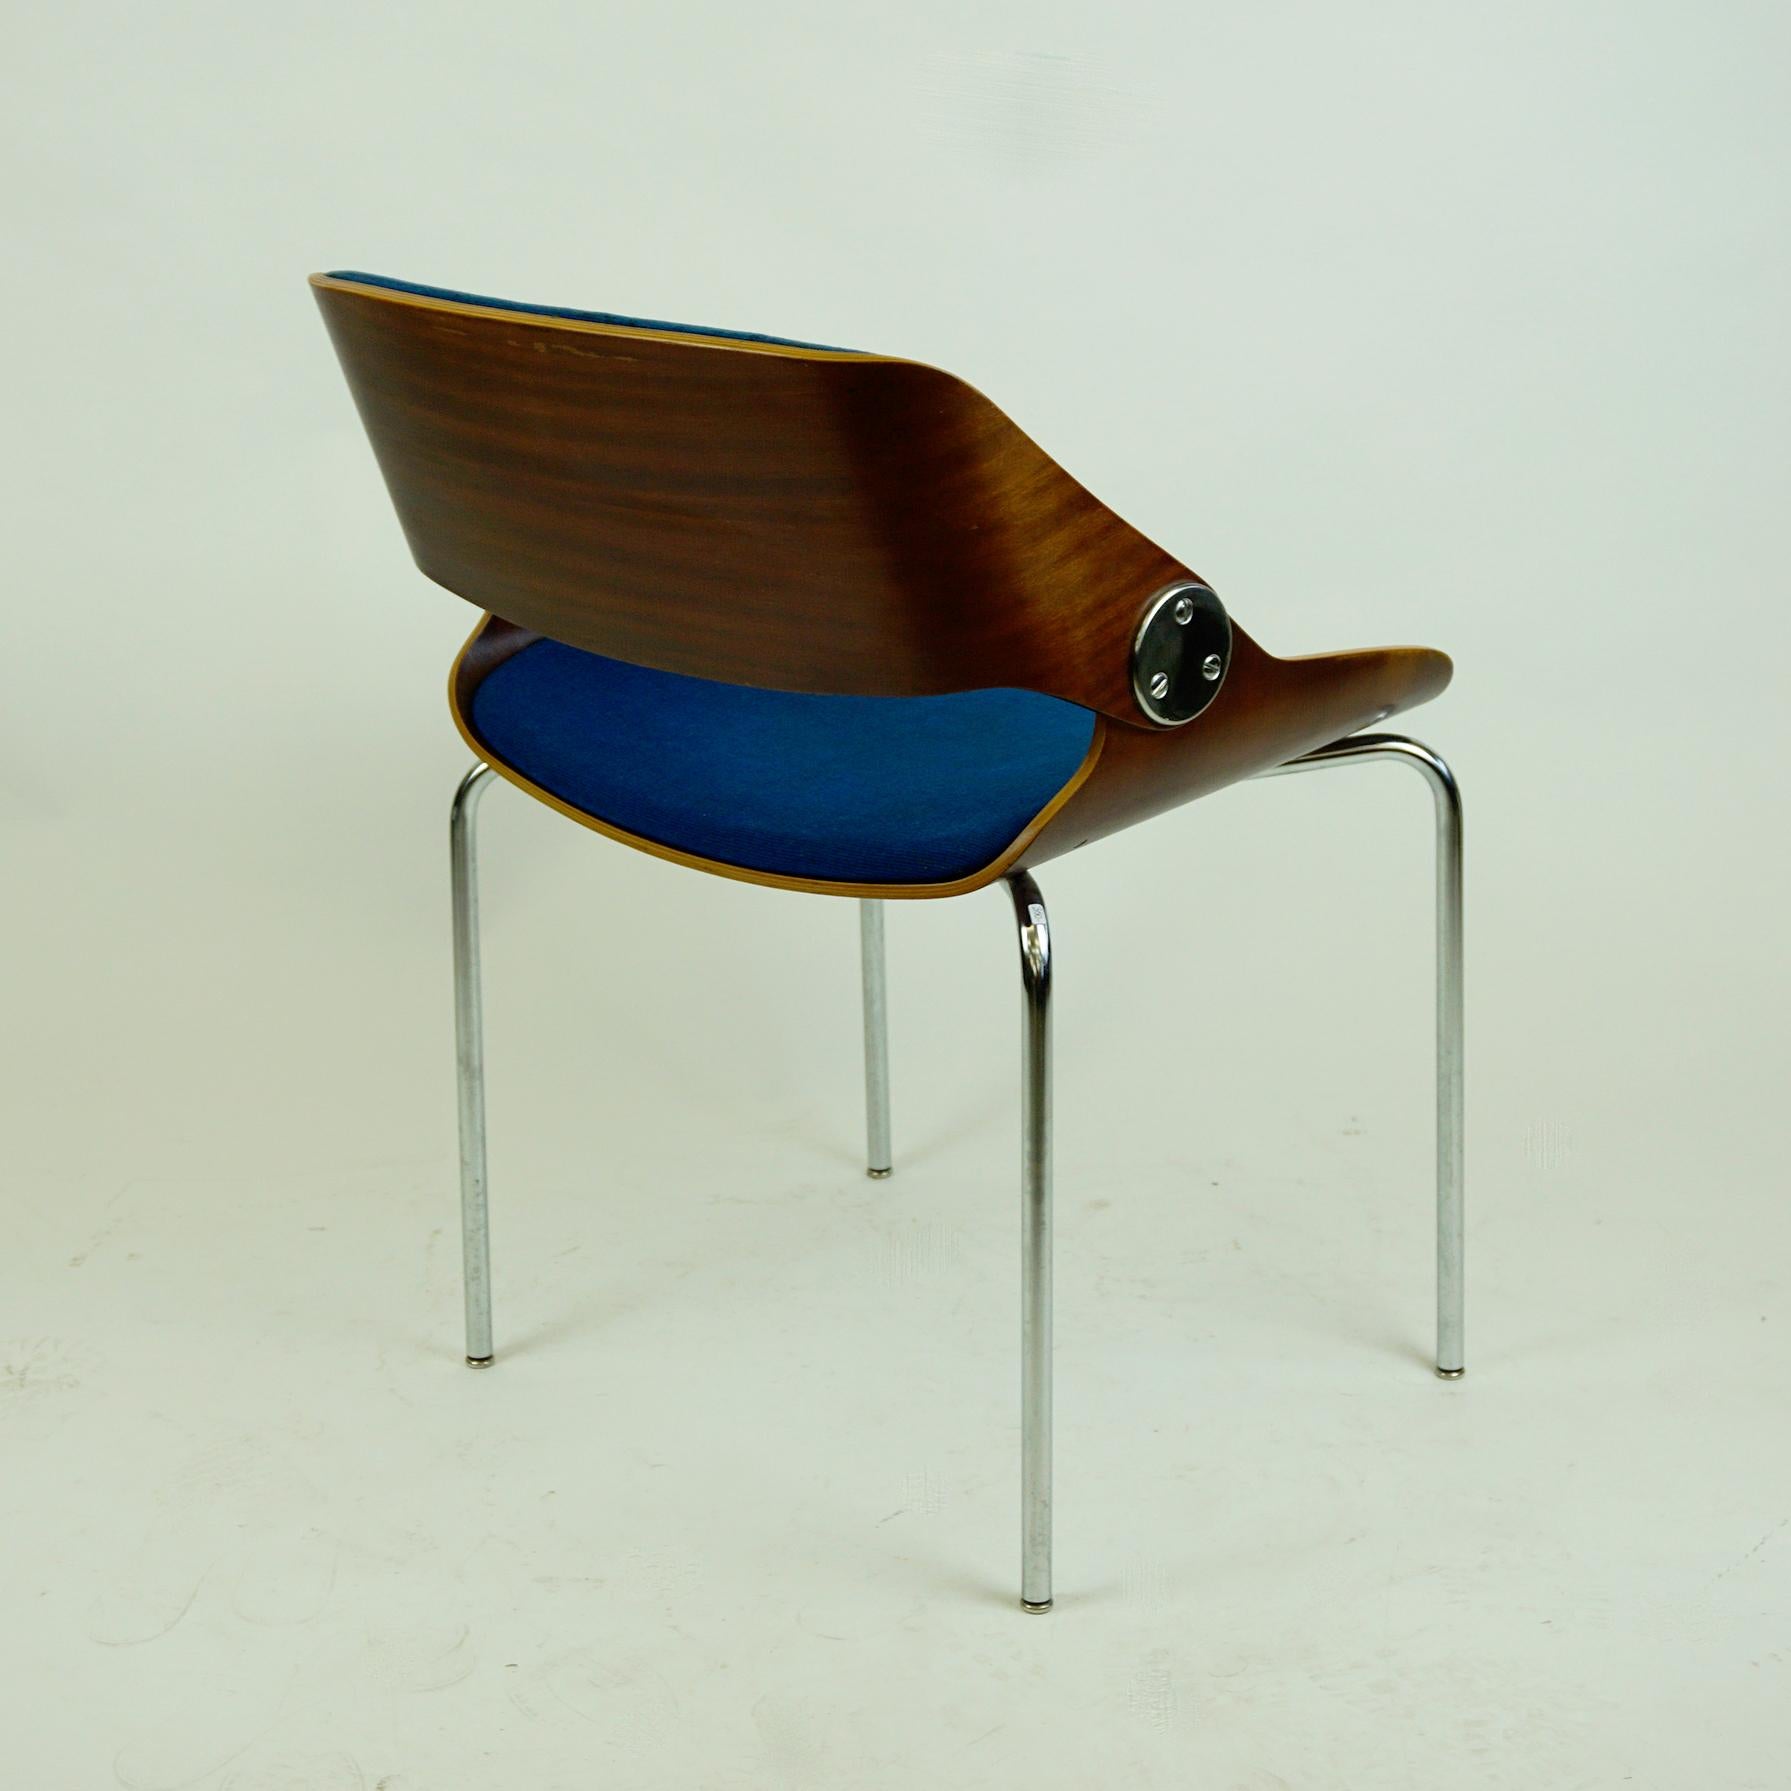 Space Age German 1960s Plywood and blue Fabric Chair by Eugen Schmidt for Soloform